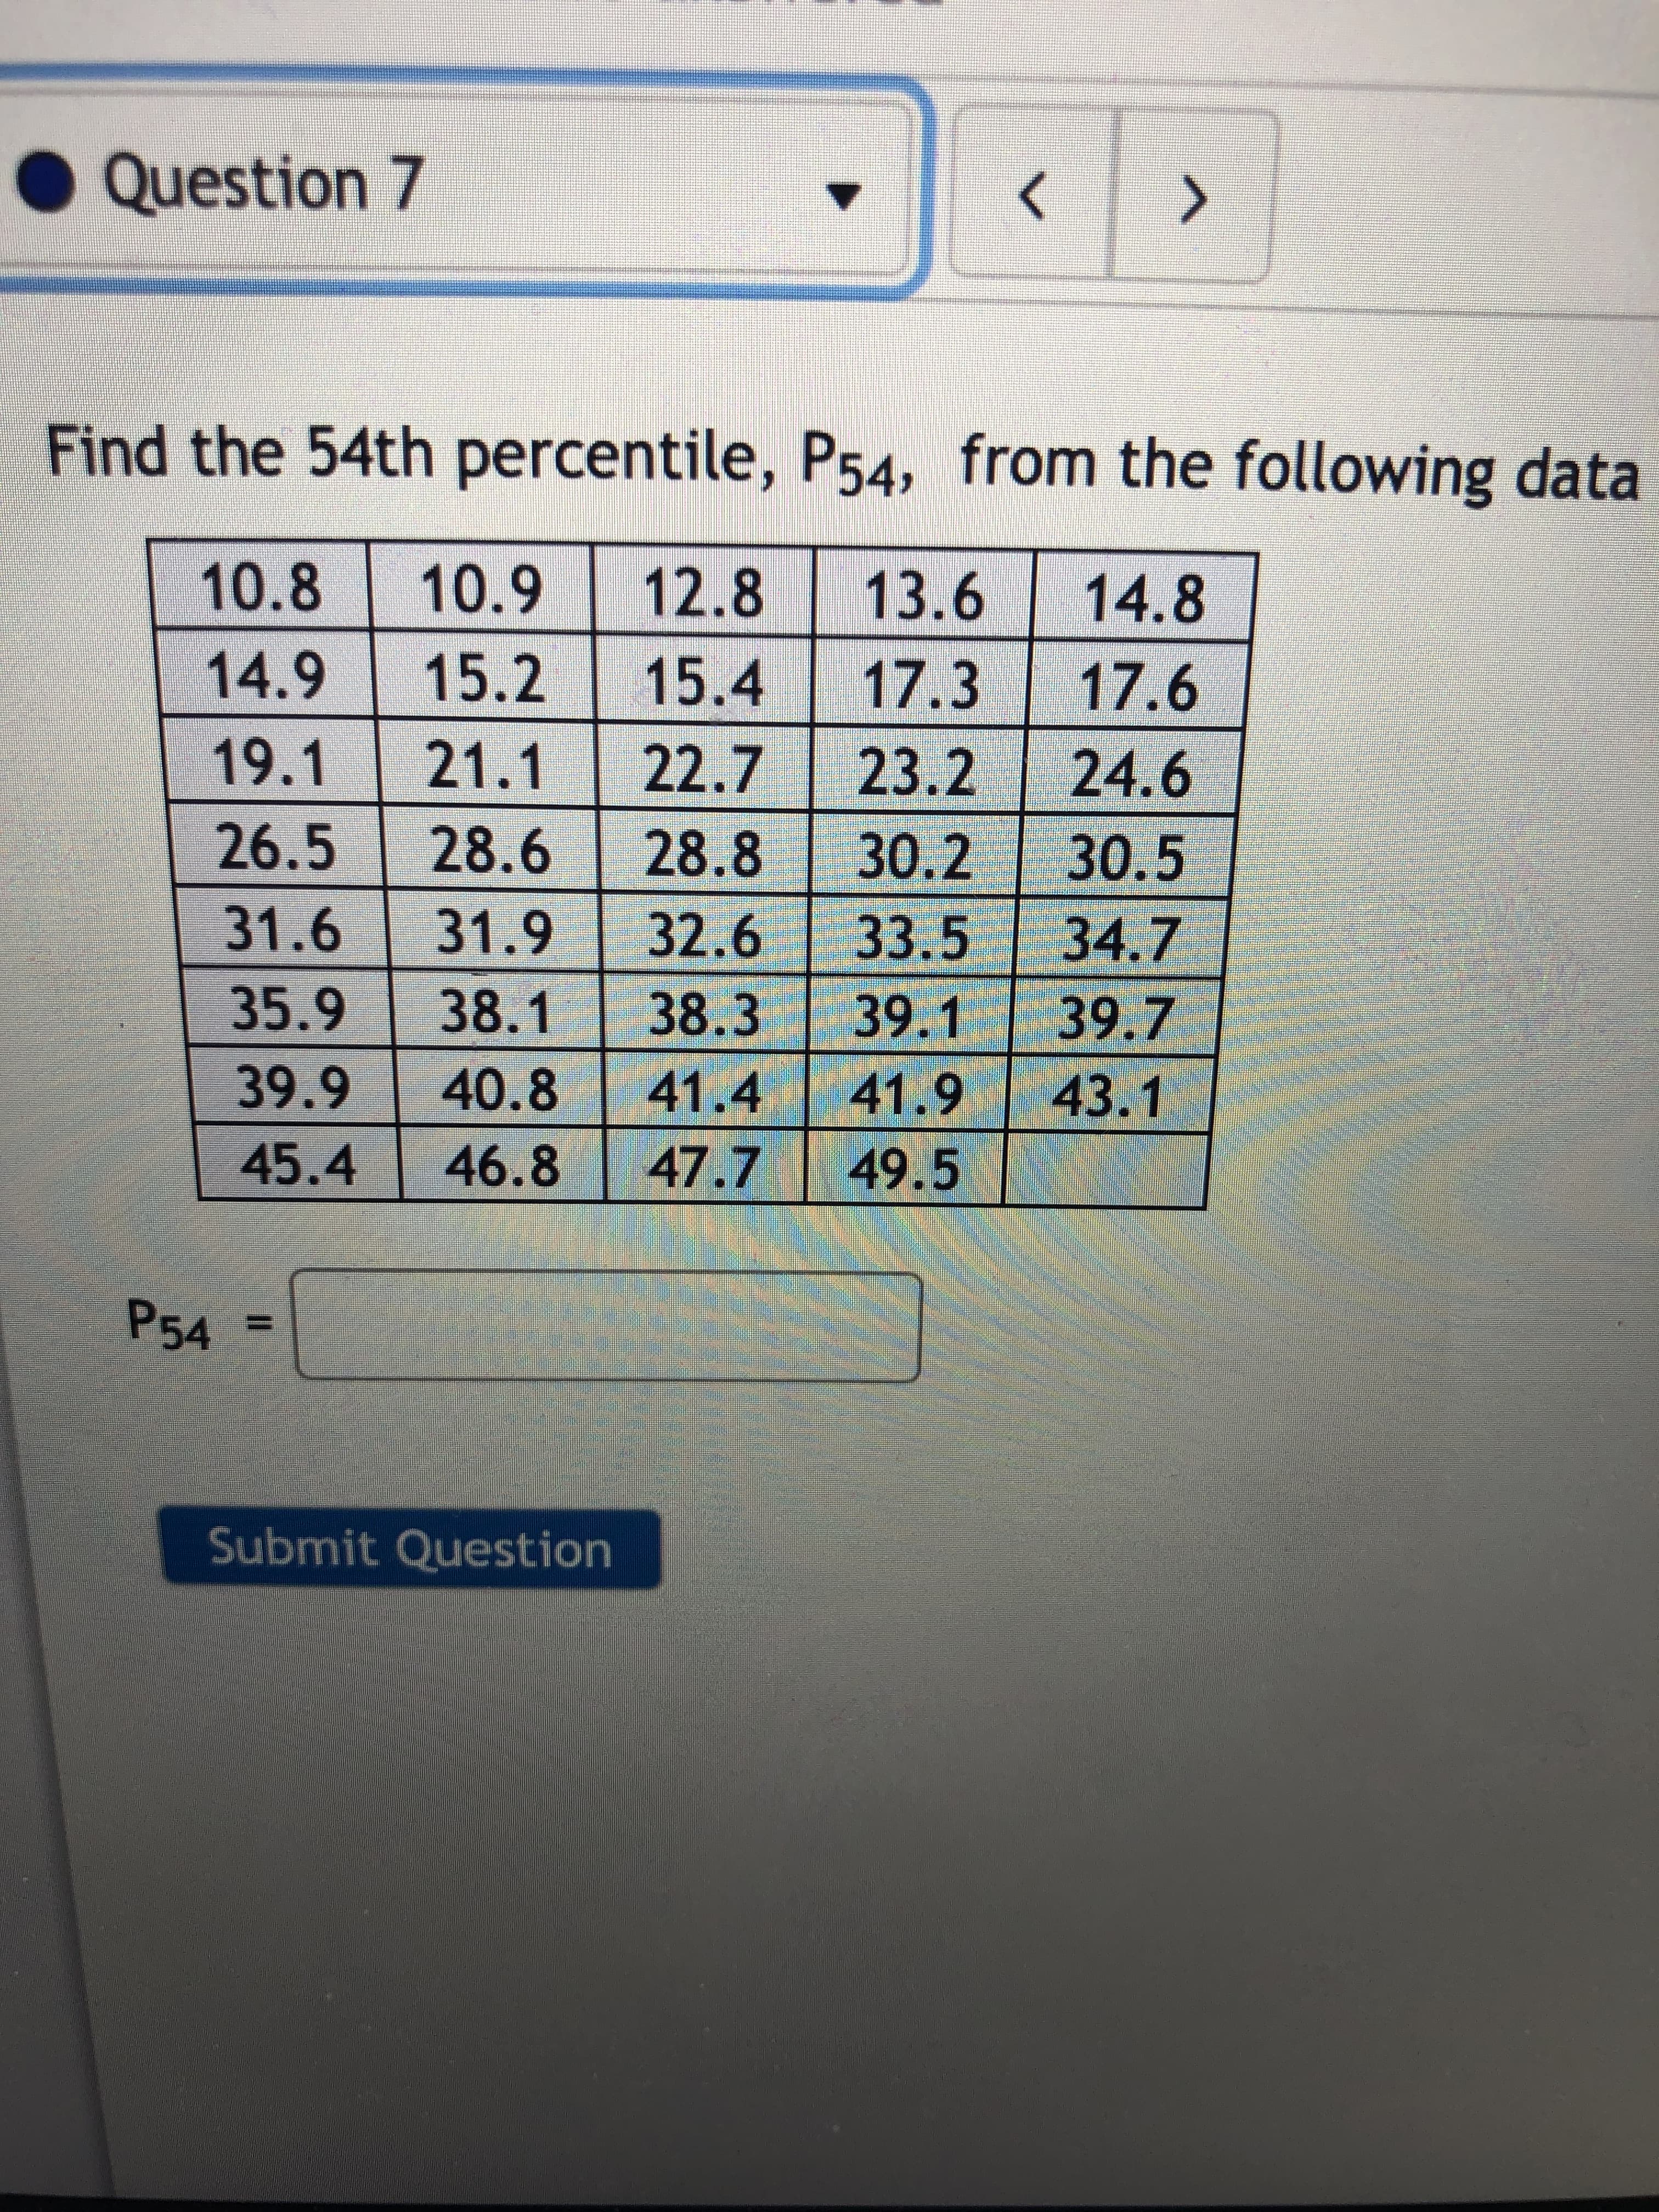 Find the 54th percentile, P54, from the following data
